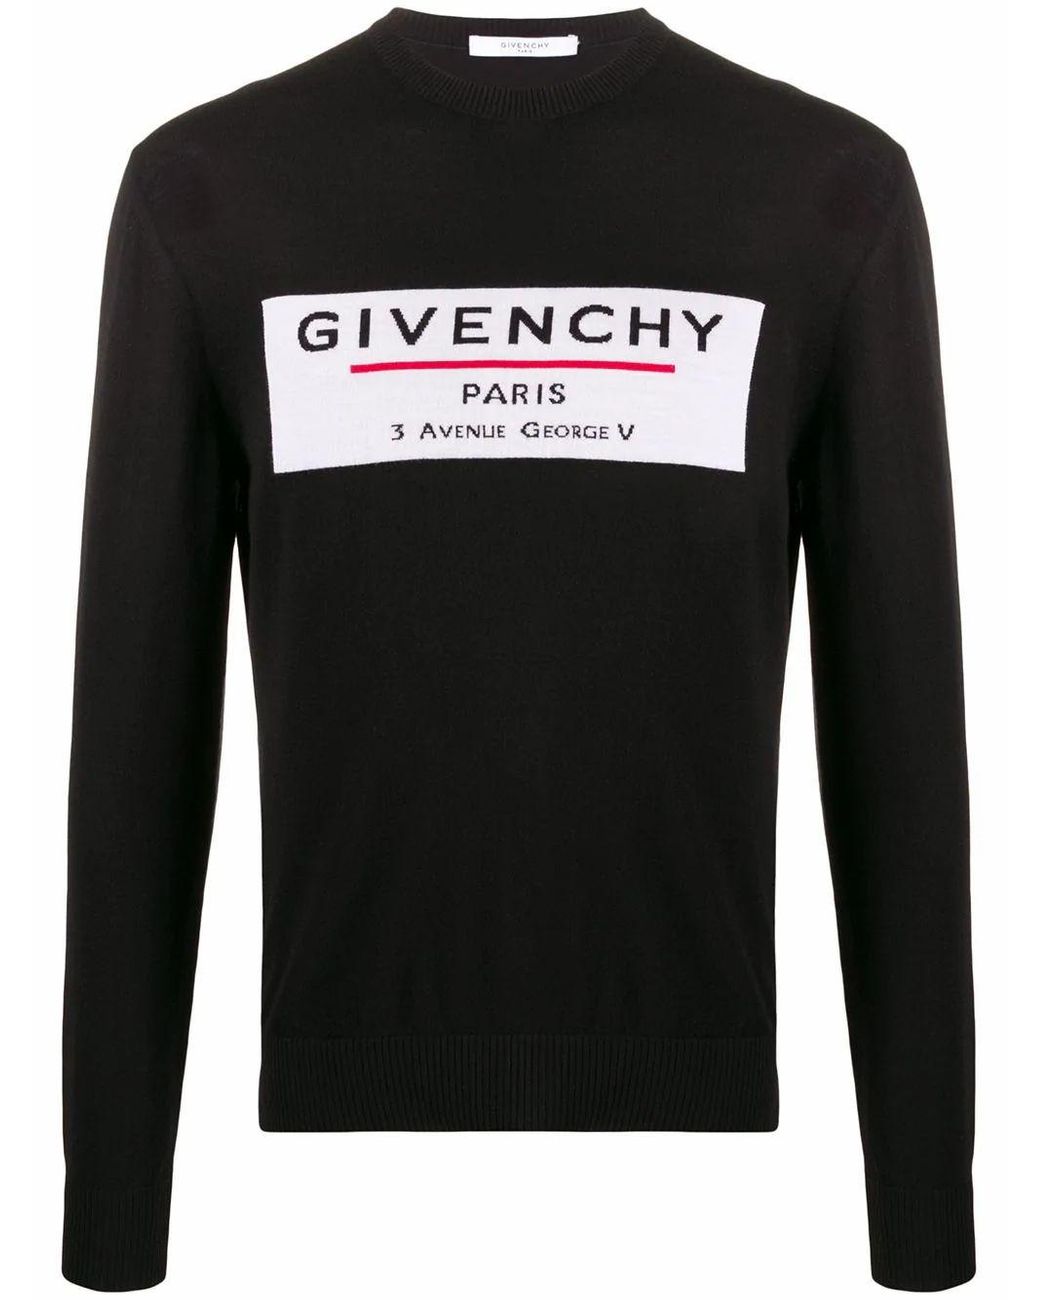 Givenchy Wool Sweater in Black for Men - Lyst